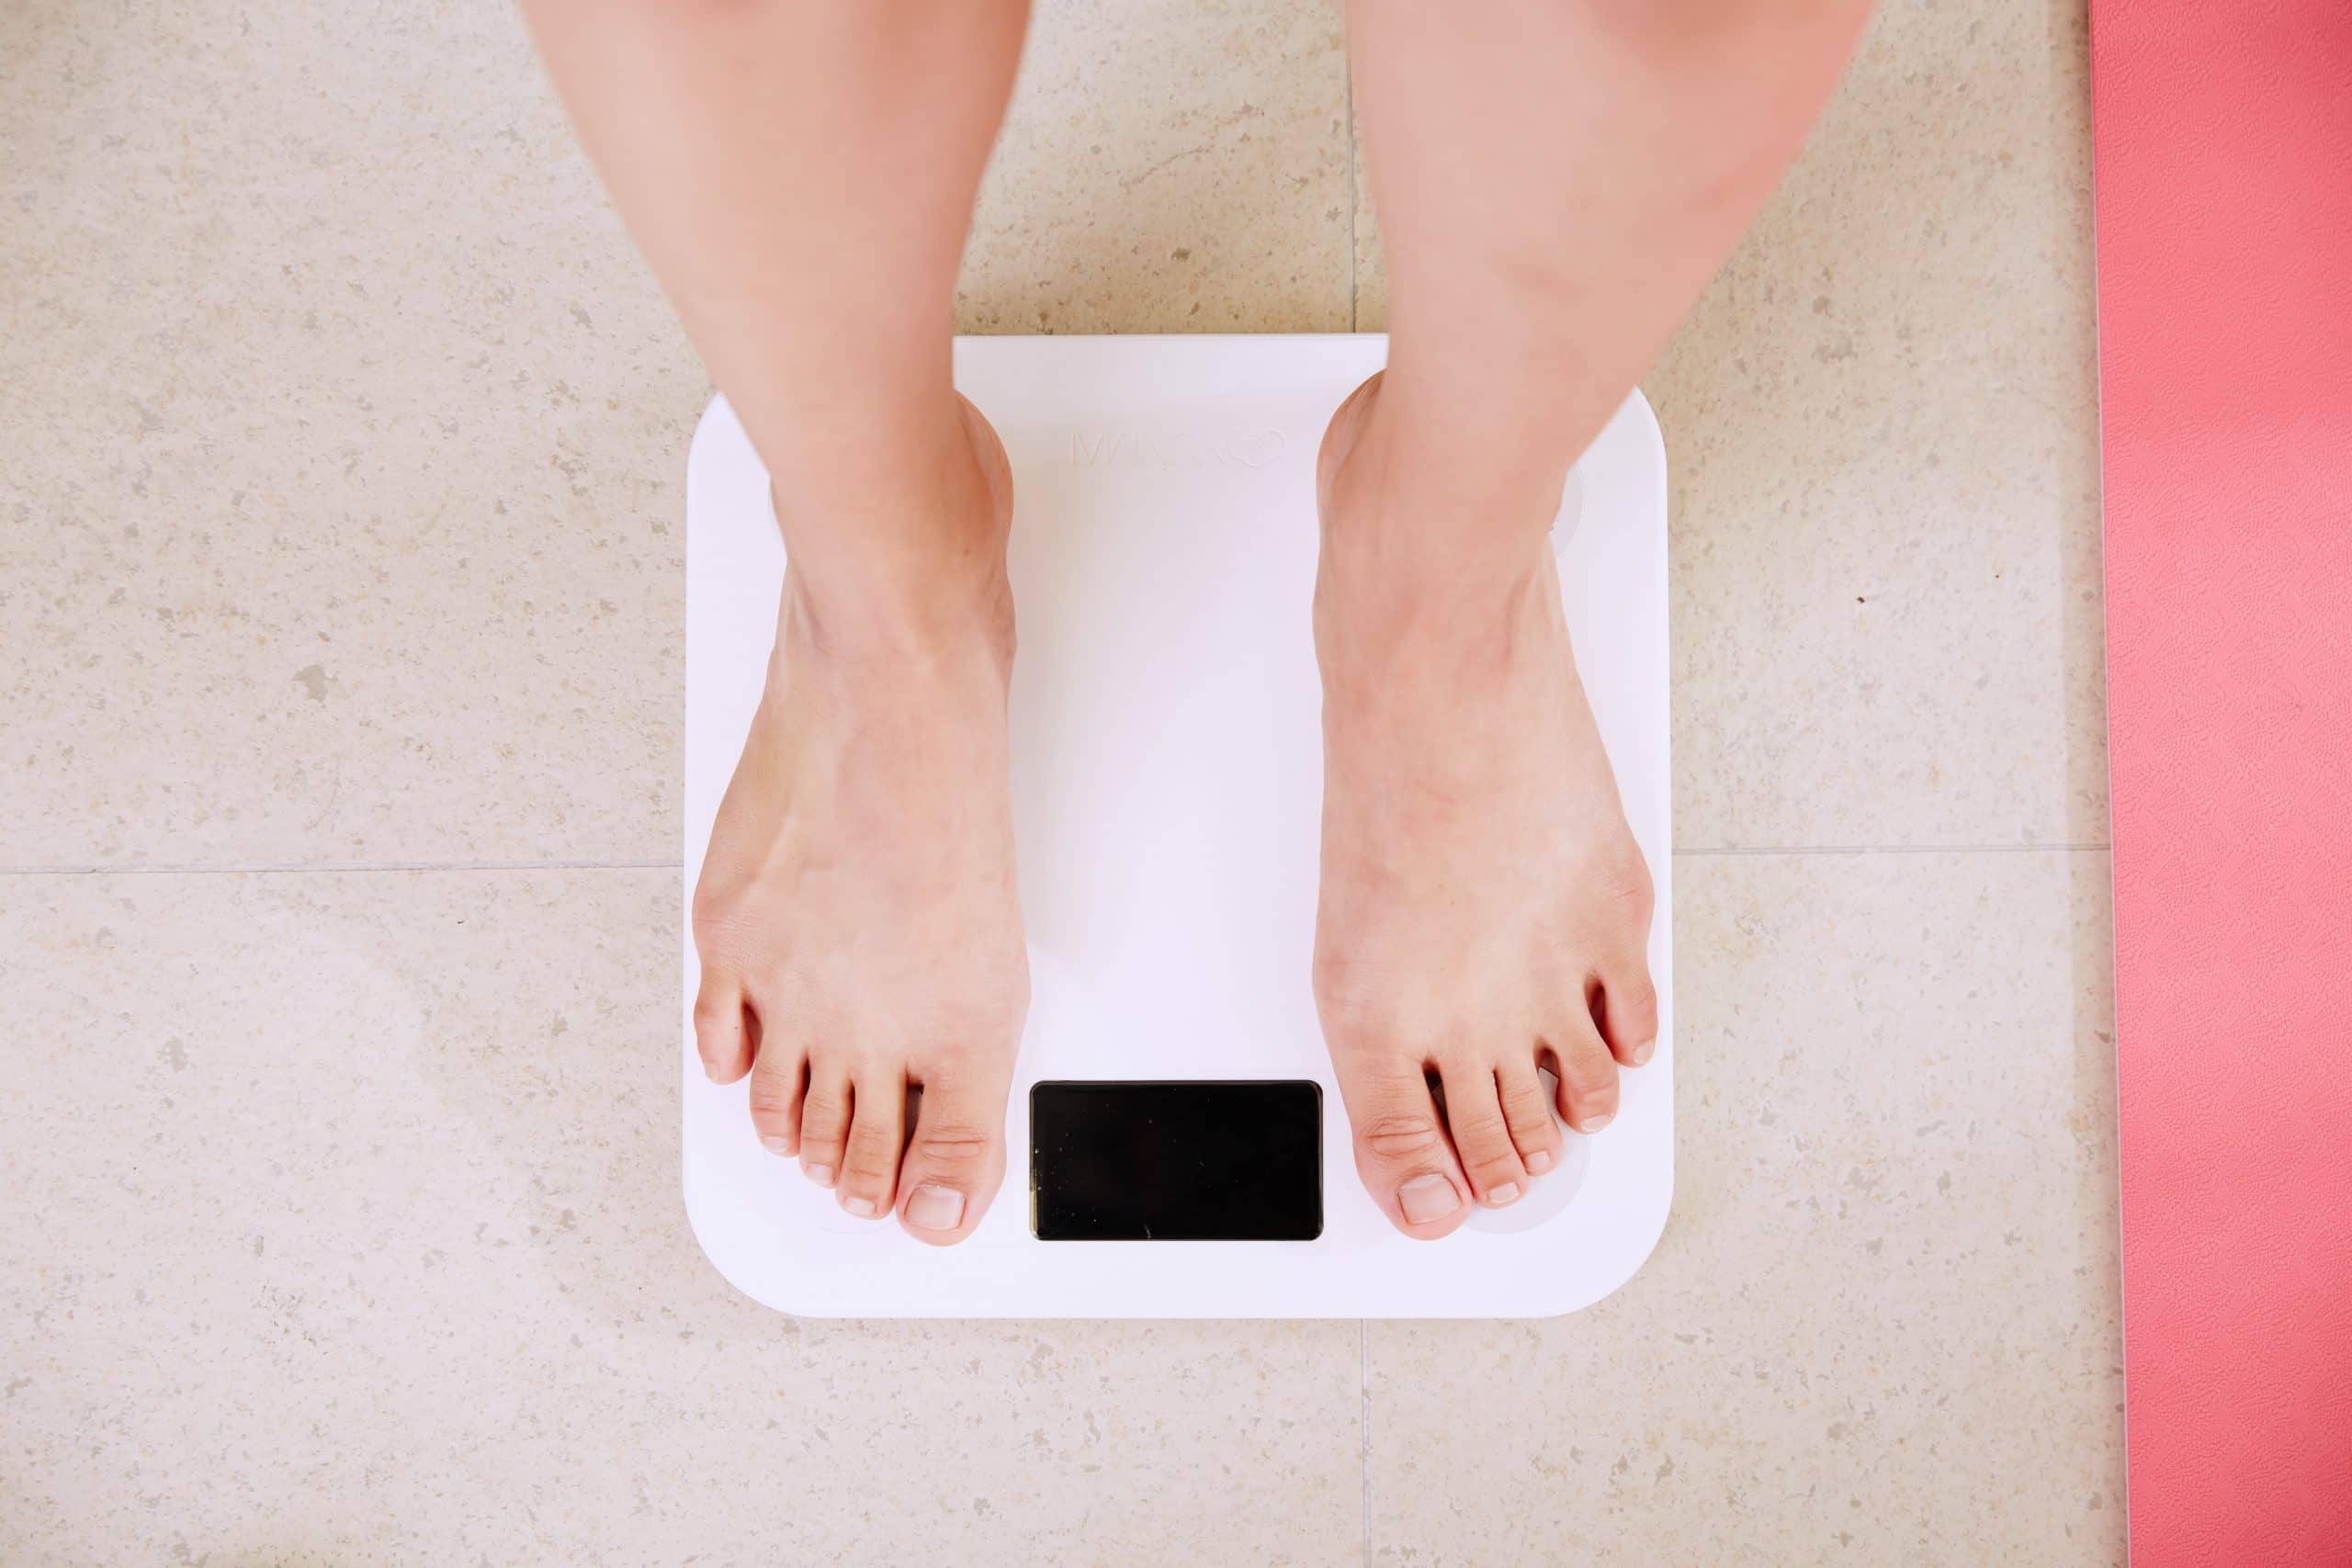 person the scales weighing themselves